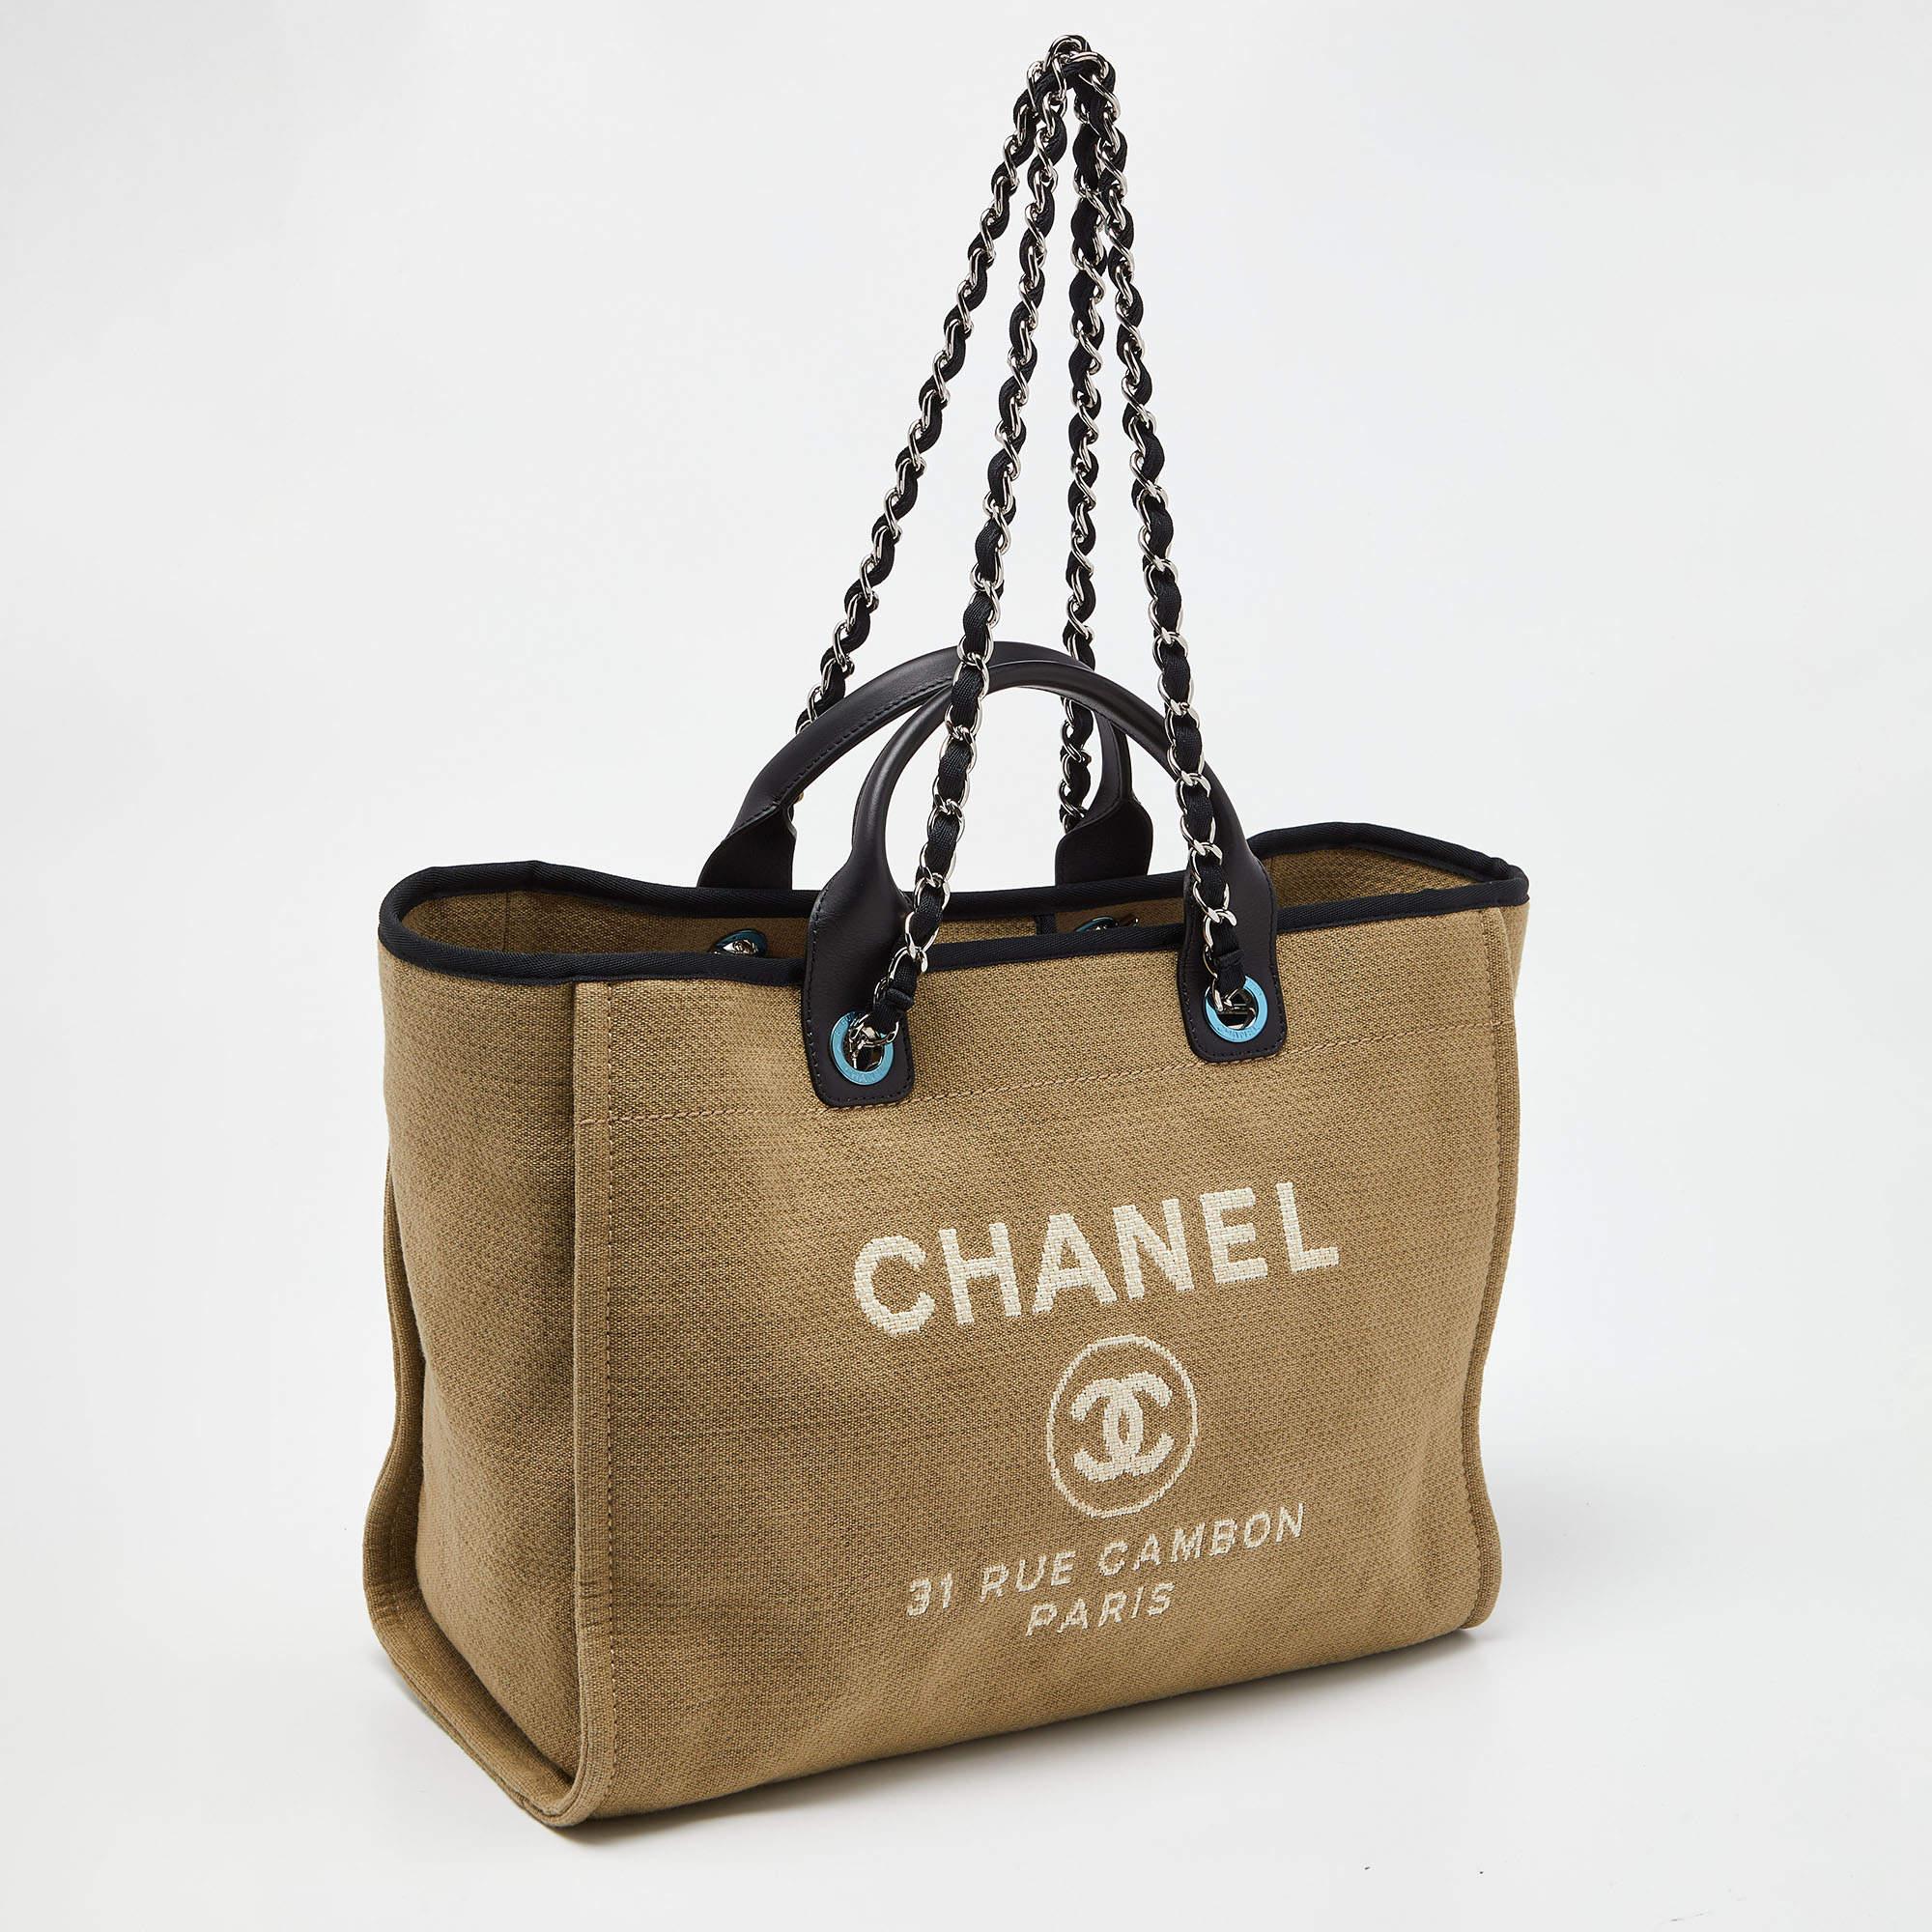 This Deauville shopper tote from Chanel is truly beautiful in every way! It has been designed using canvas and leather on the exterior with a logo print detail decorating the front. Its large, sturdy shape is supported by dual handles and a woven